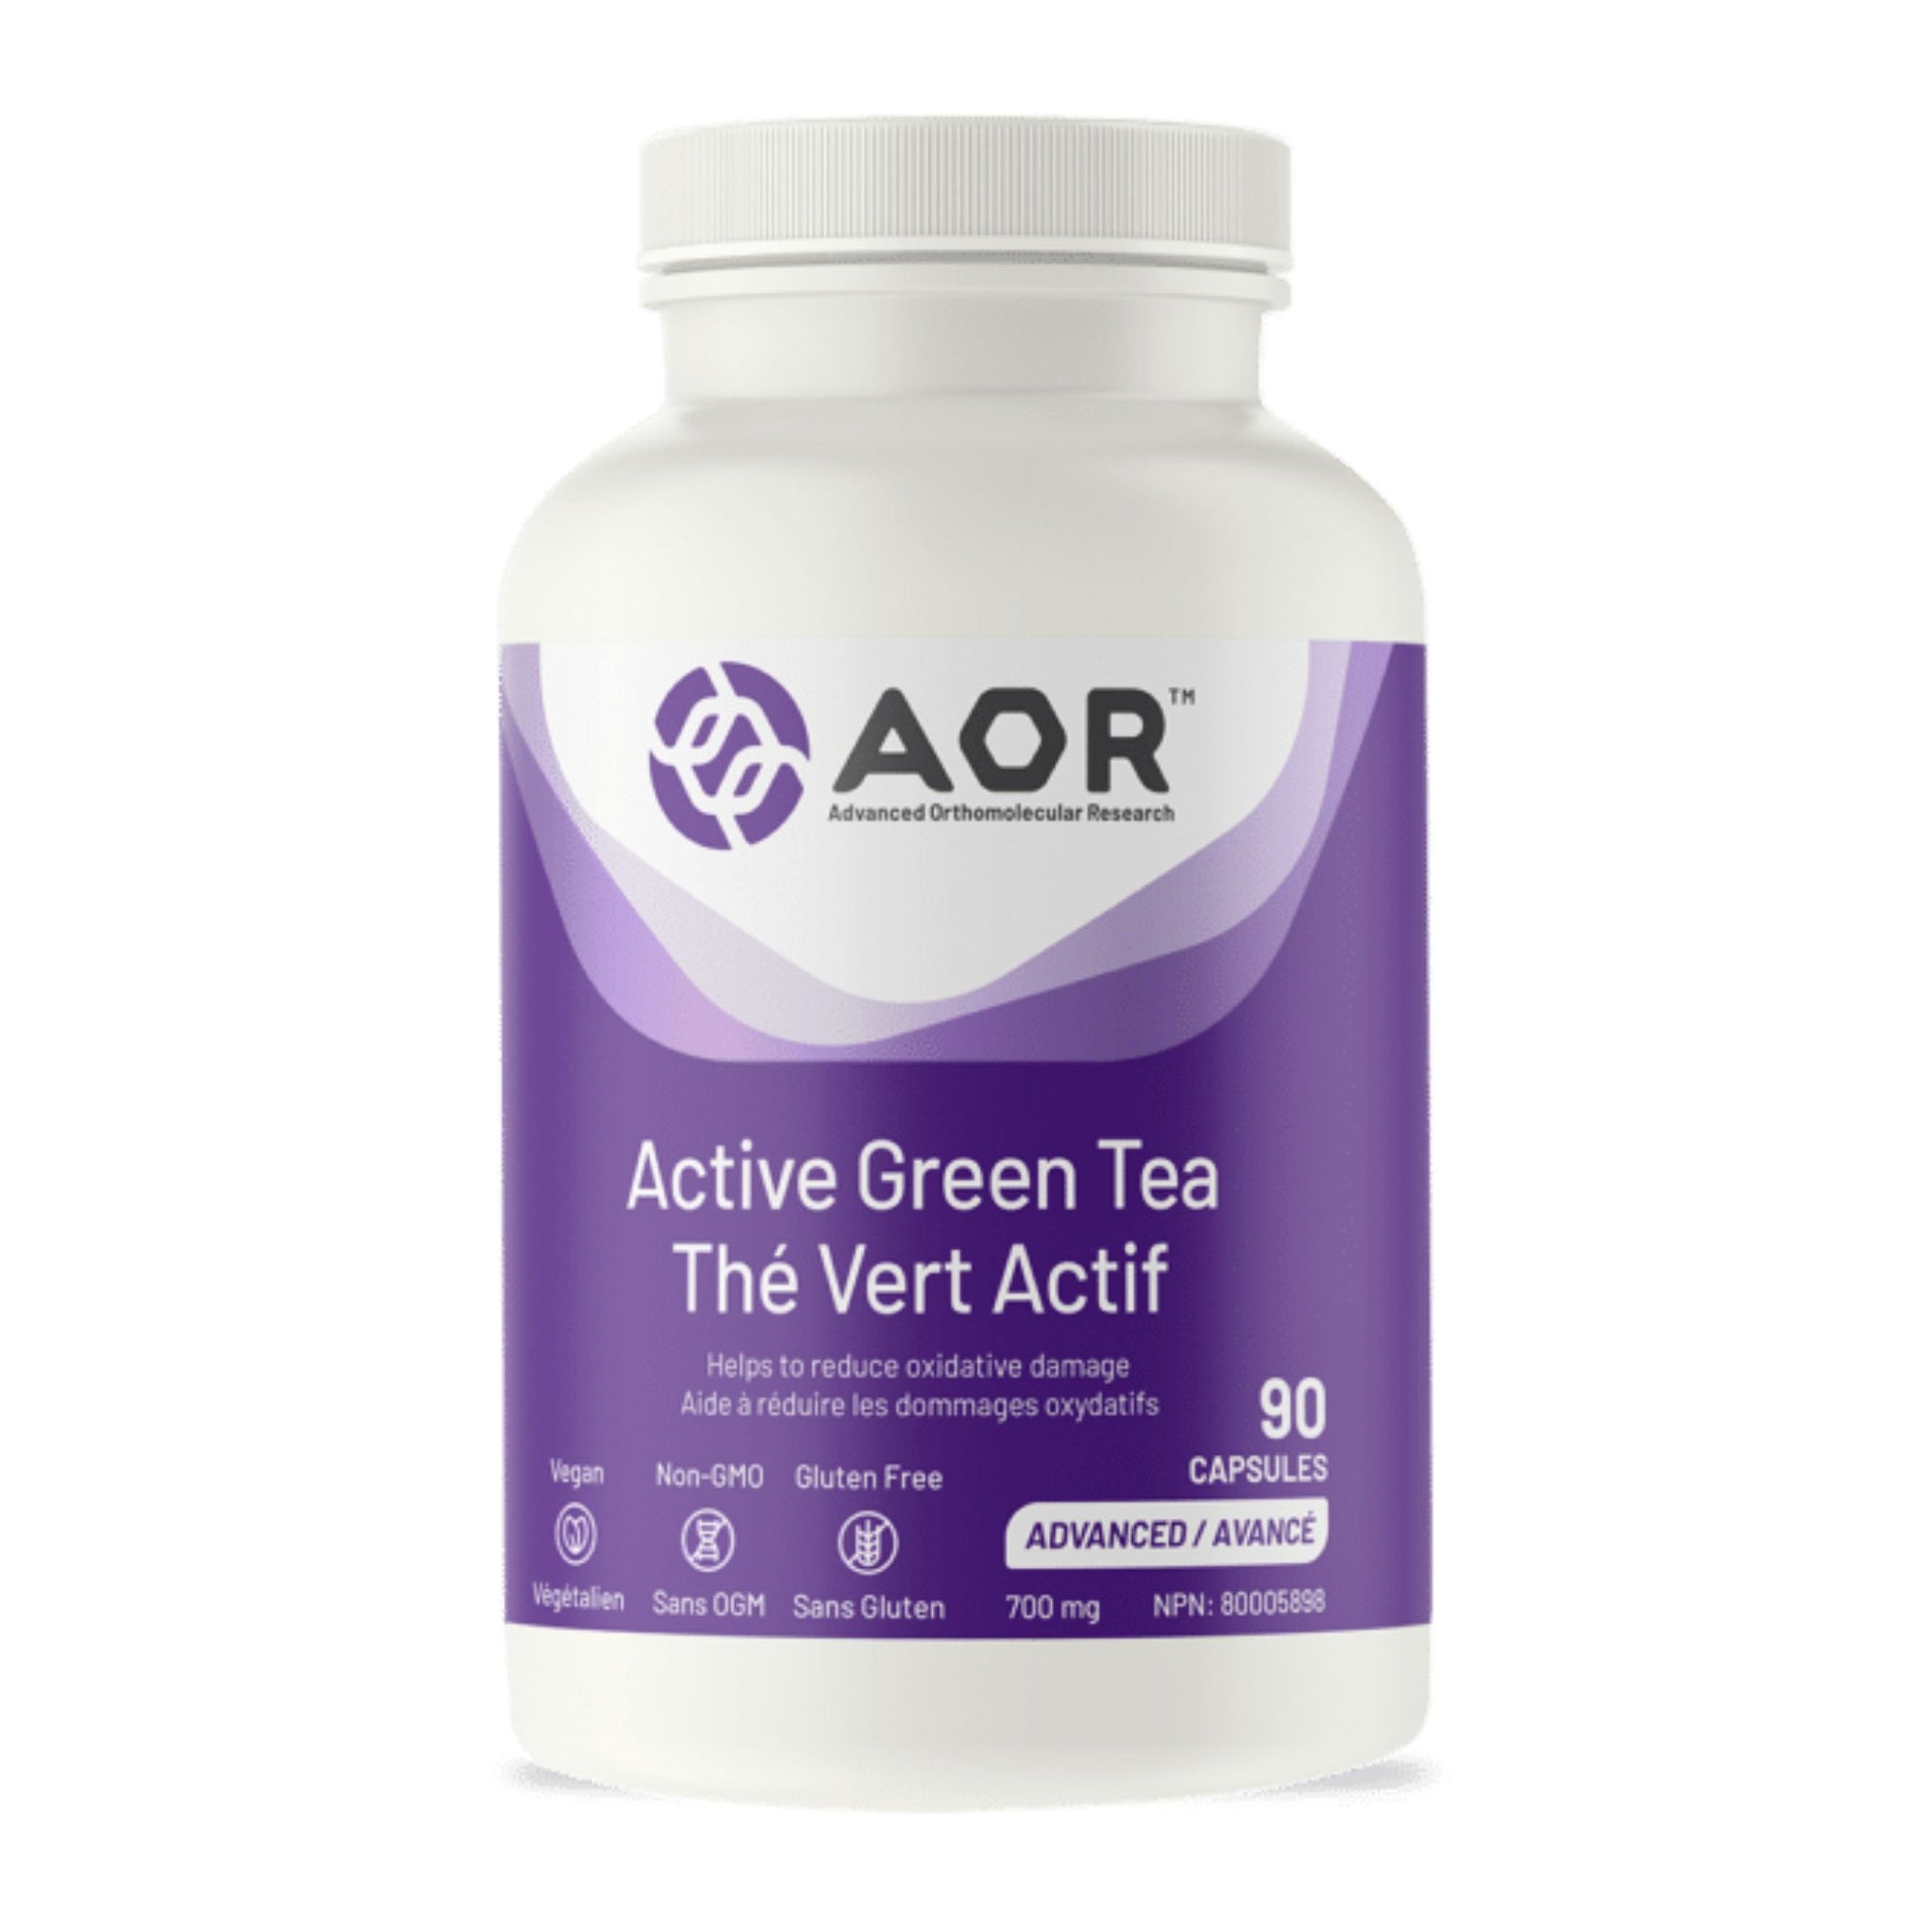 AOR Active Green Tea 90 Vegetable Capsules - Helps to reduce oxidative damage - high in Antioxidants for the maintenance of good health - Vegan, Non-GMO, Gluten Free.